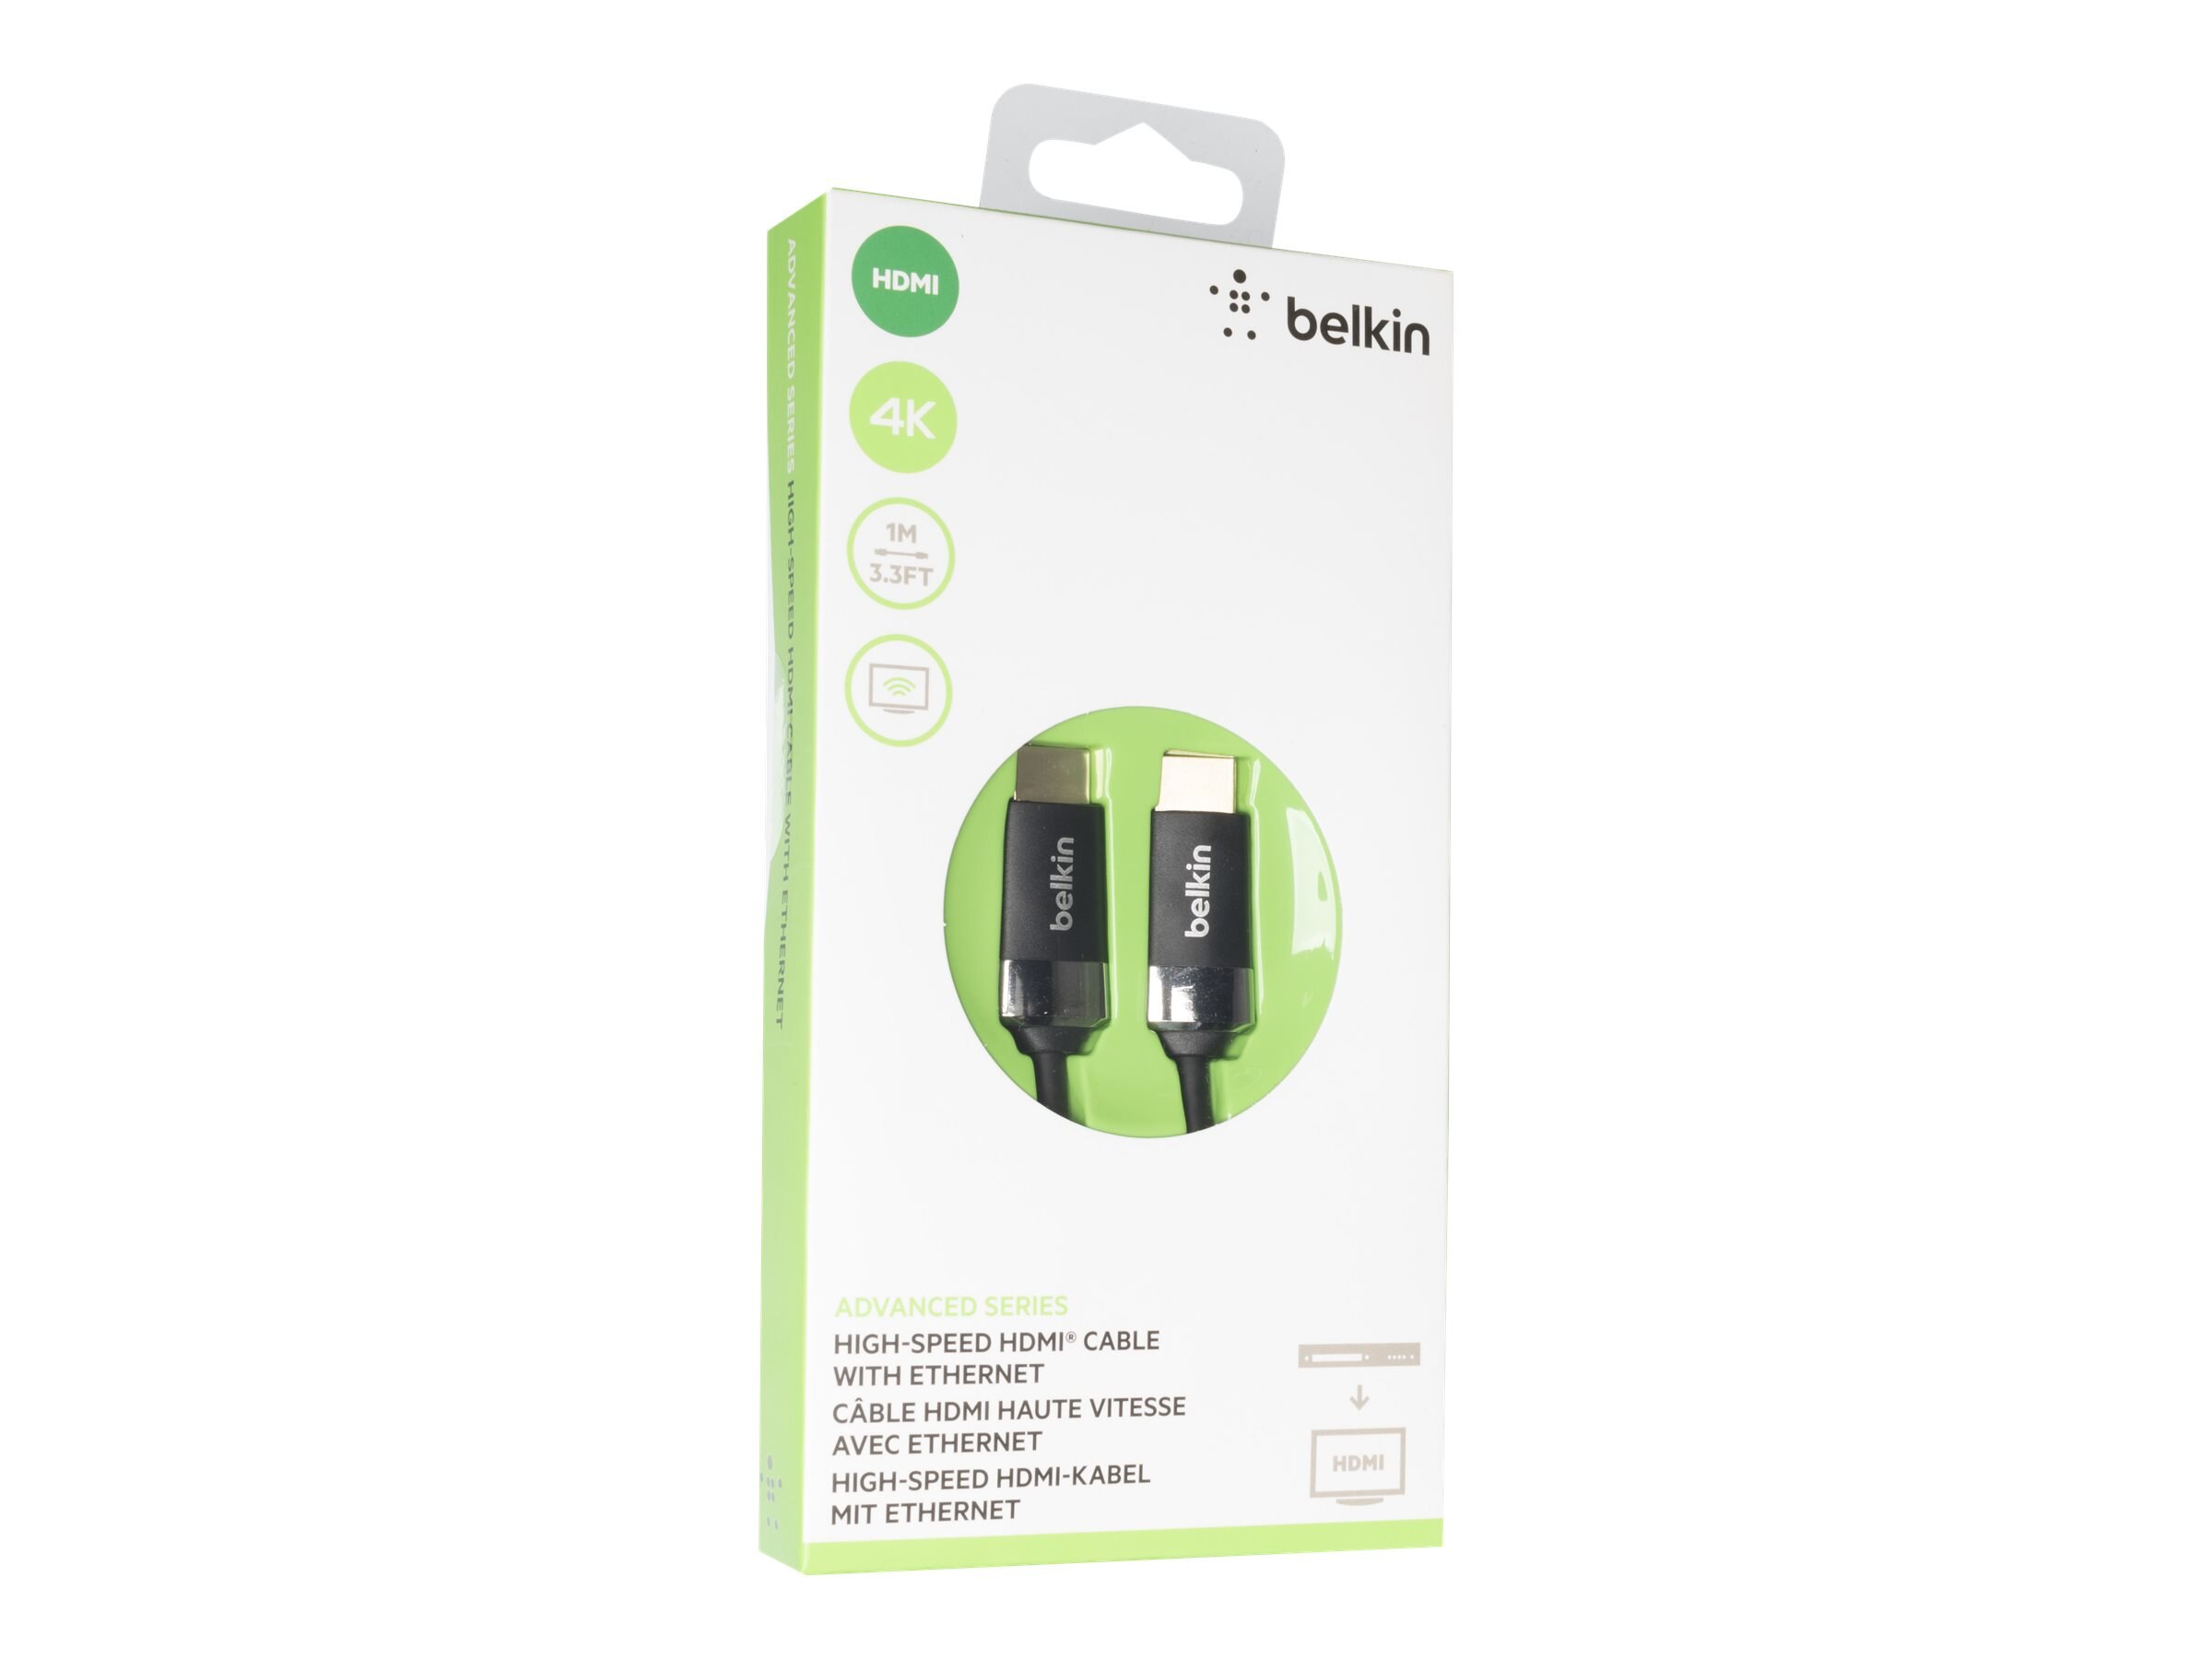 Belkin High-Speed HDMI Cable with Ethernet - 1m, 4K HD, Gold